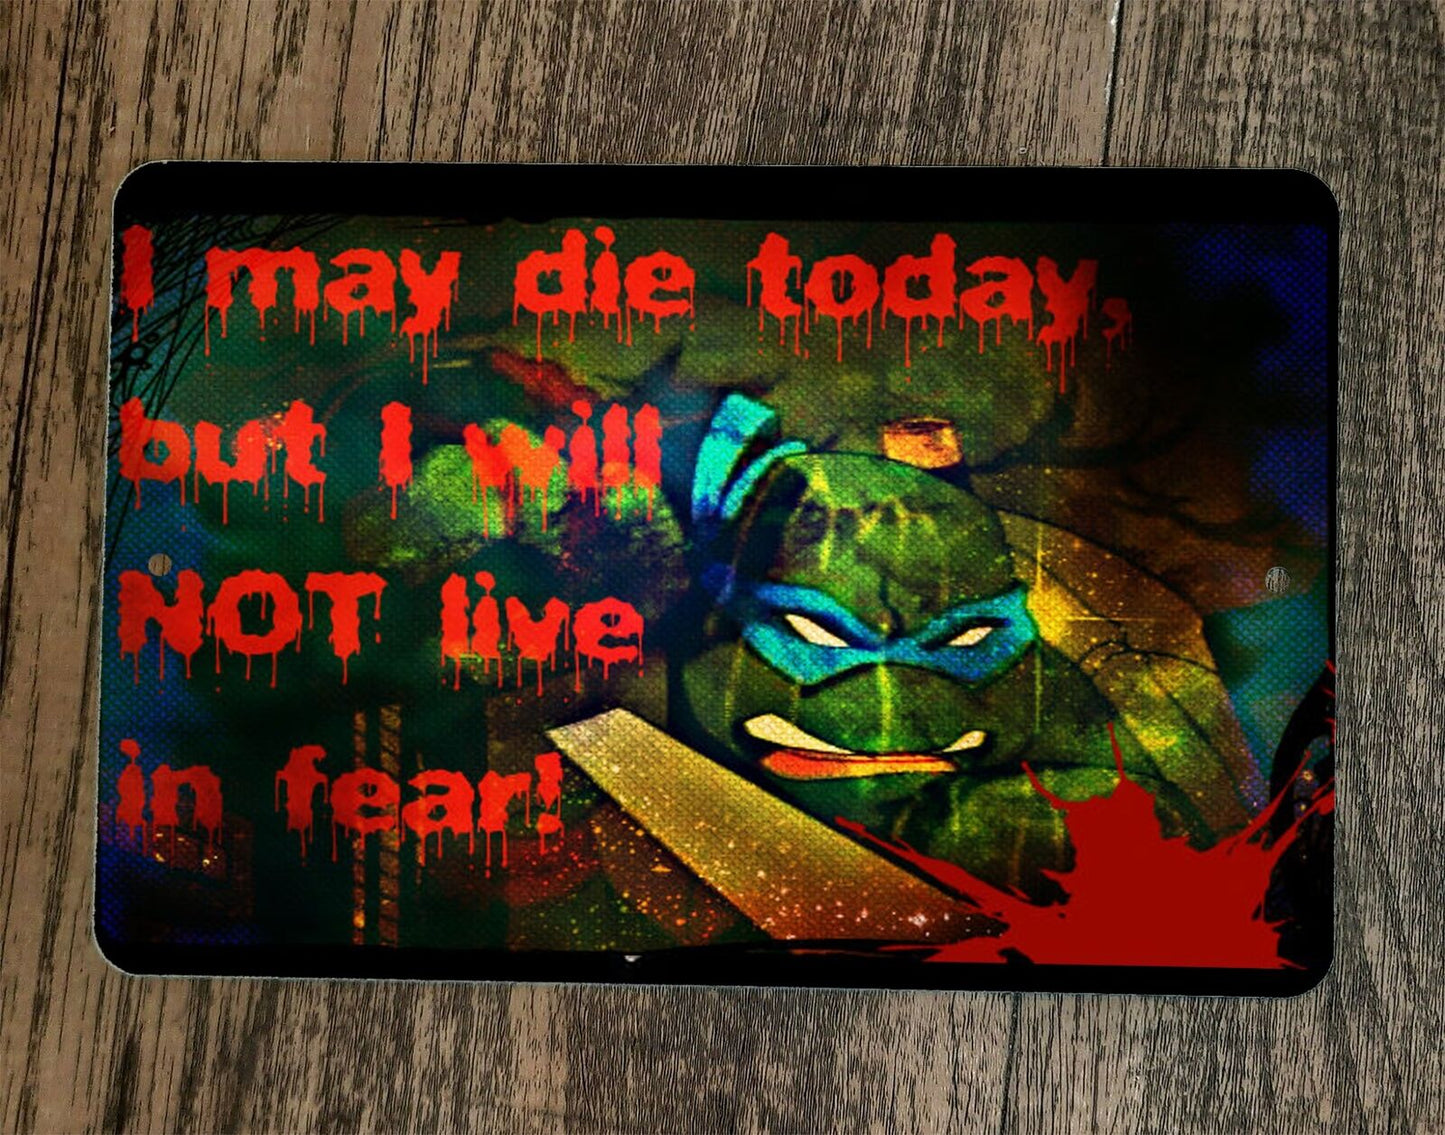 I May Die Today But I will Not Live in Fear TMNT 8x12 Metal Wall Sign Poster